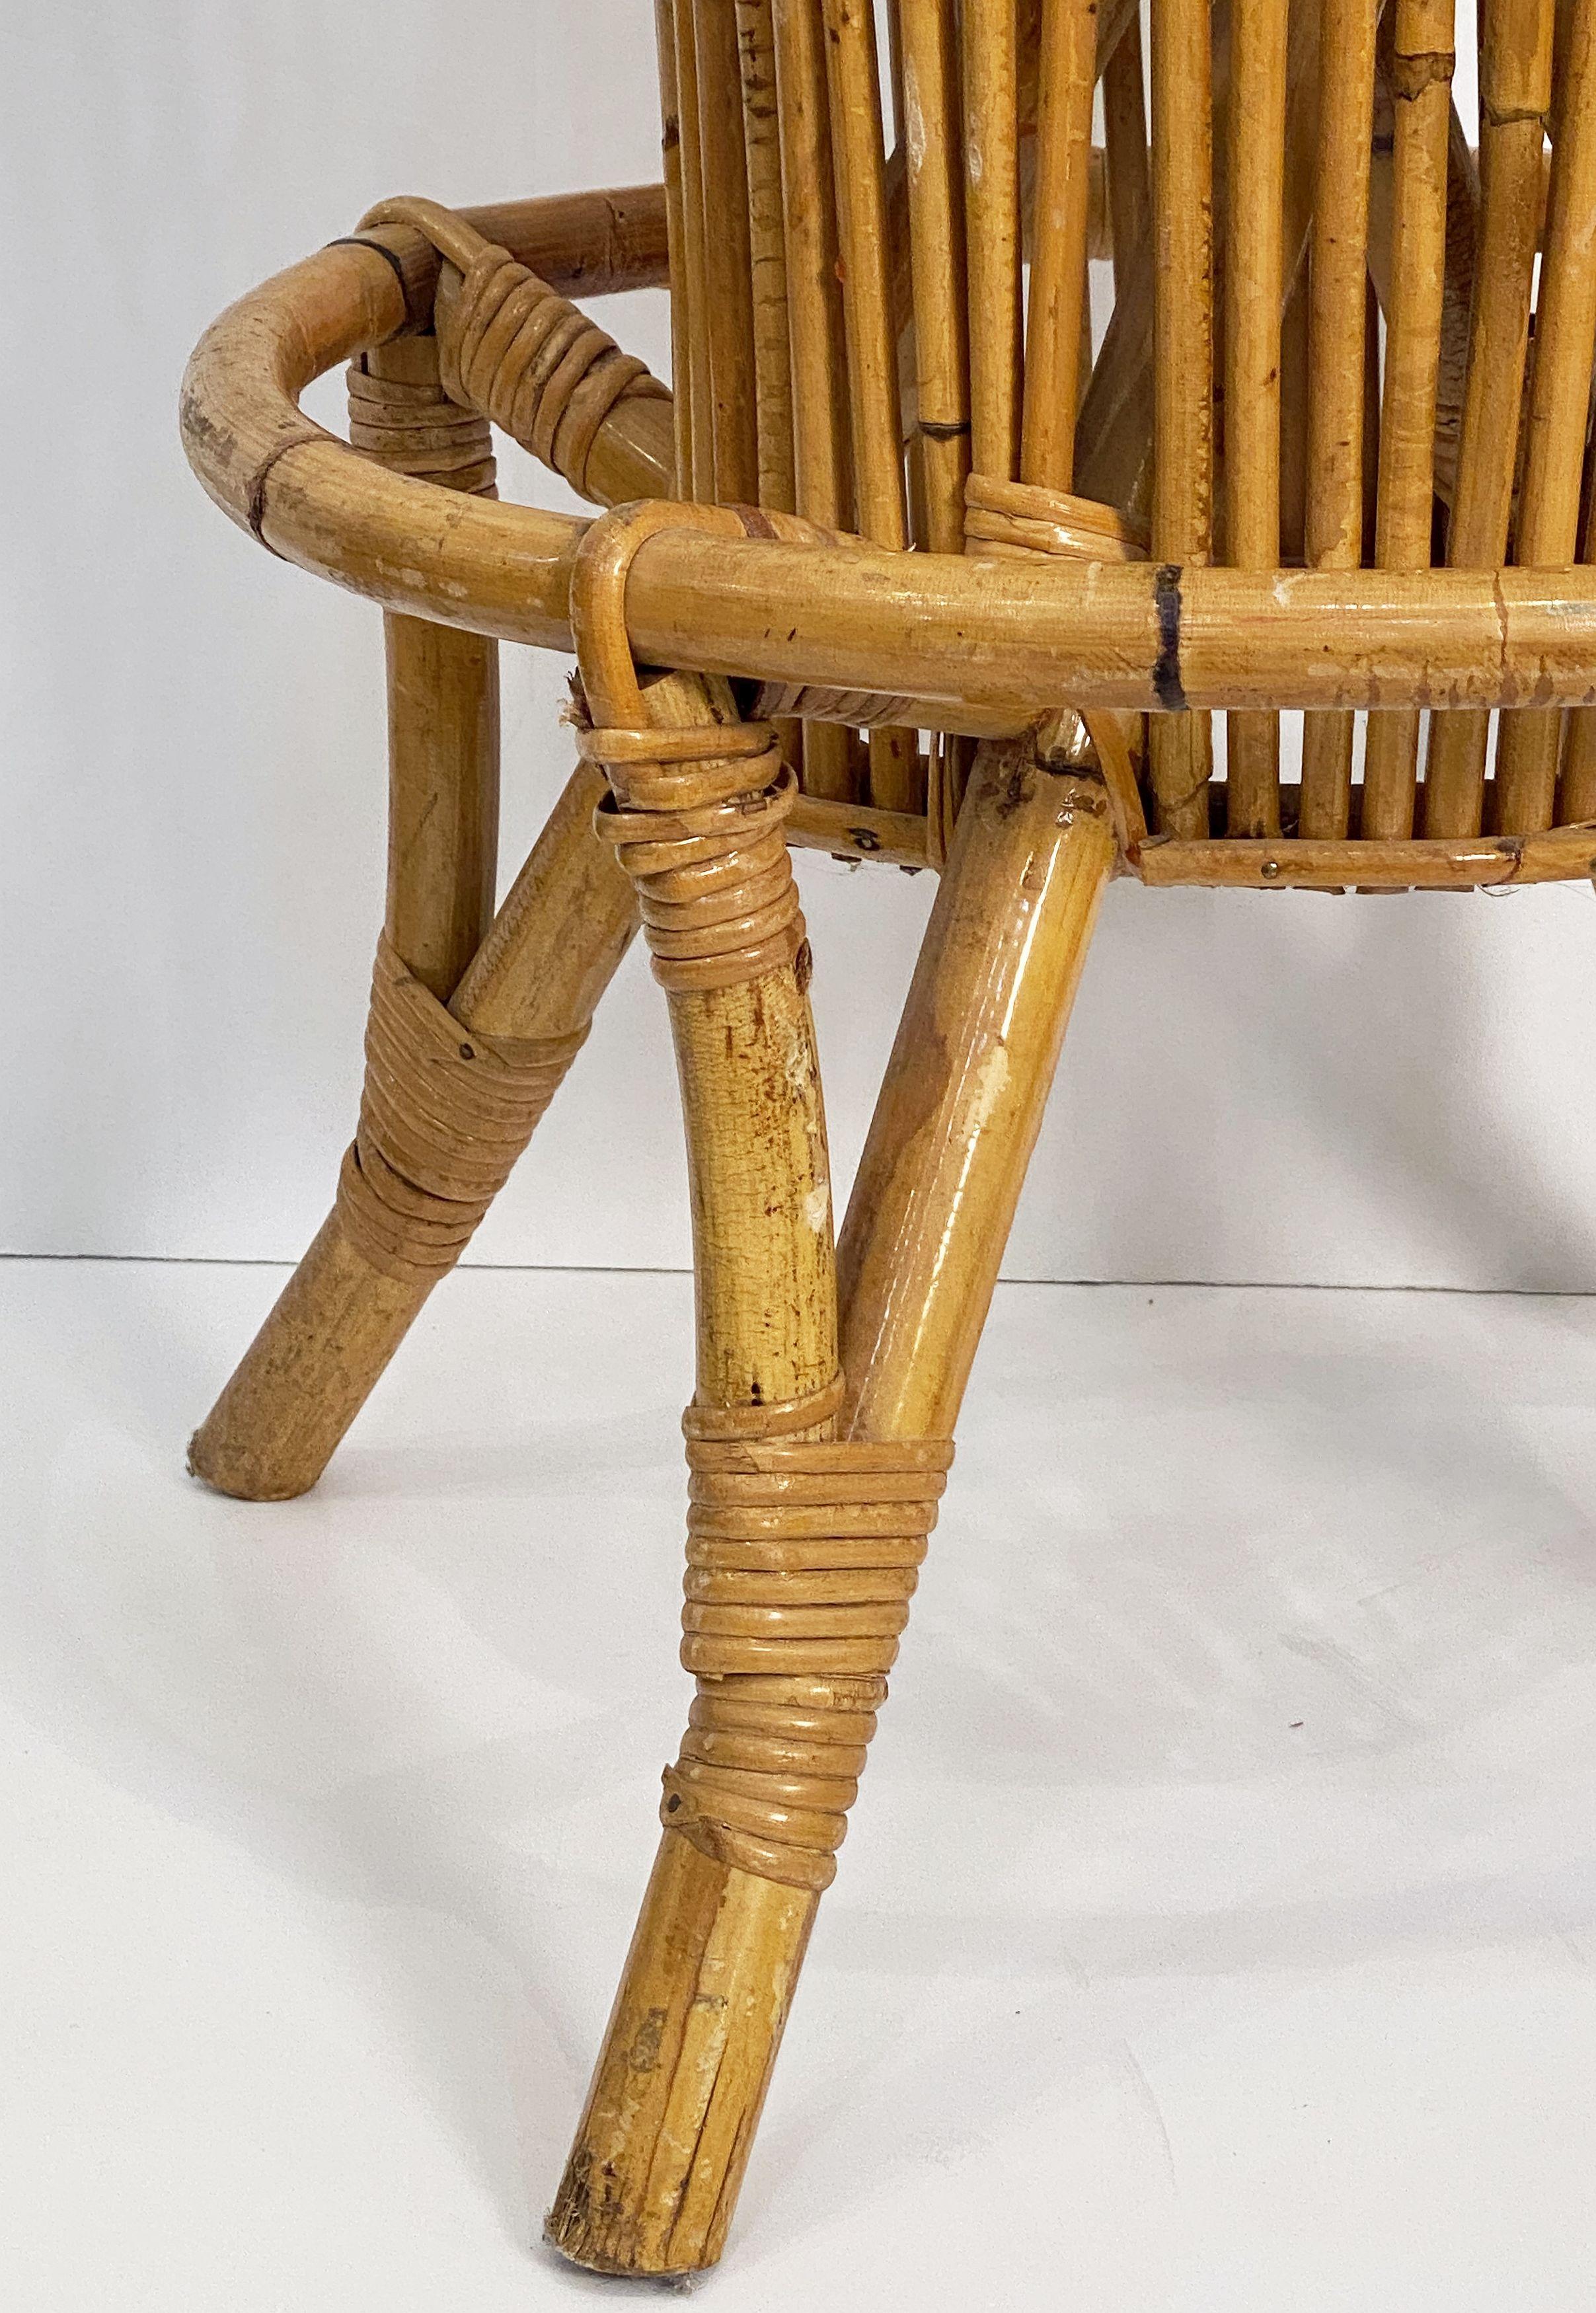 Italian Stool of Rattan and Bamboo from the Mid-20th Century For Sale 6